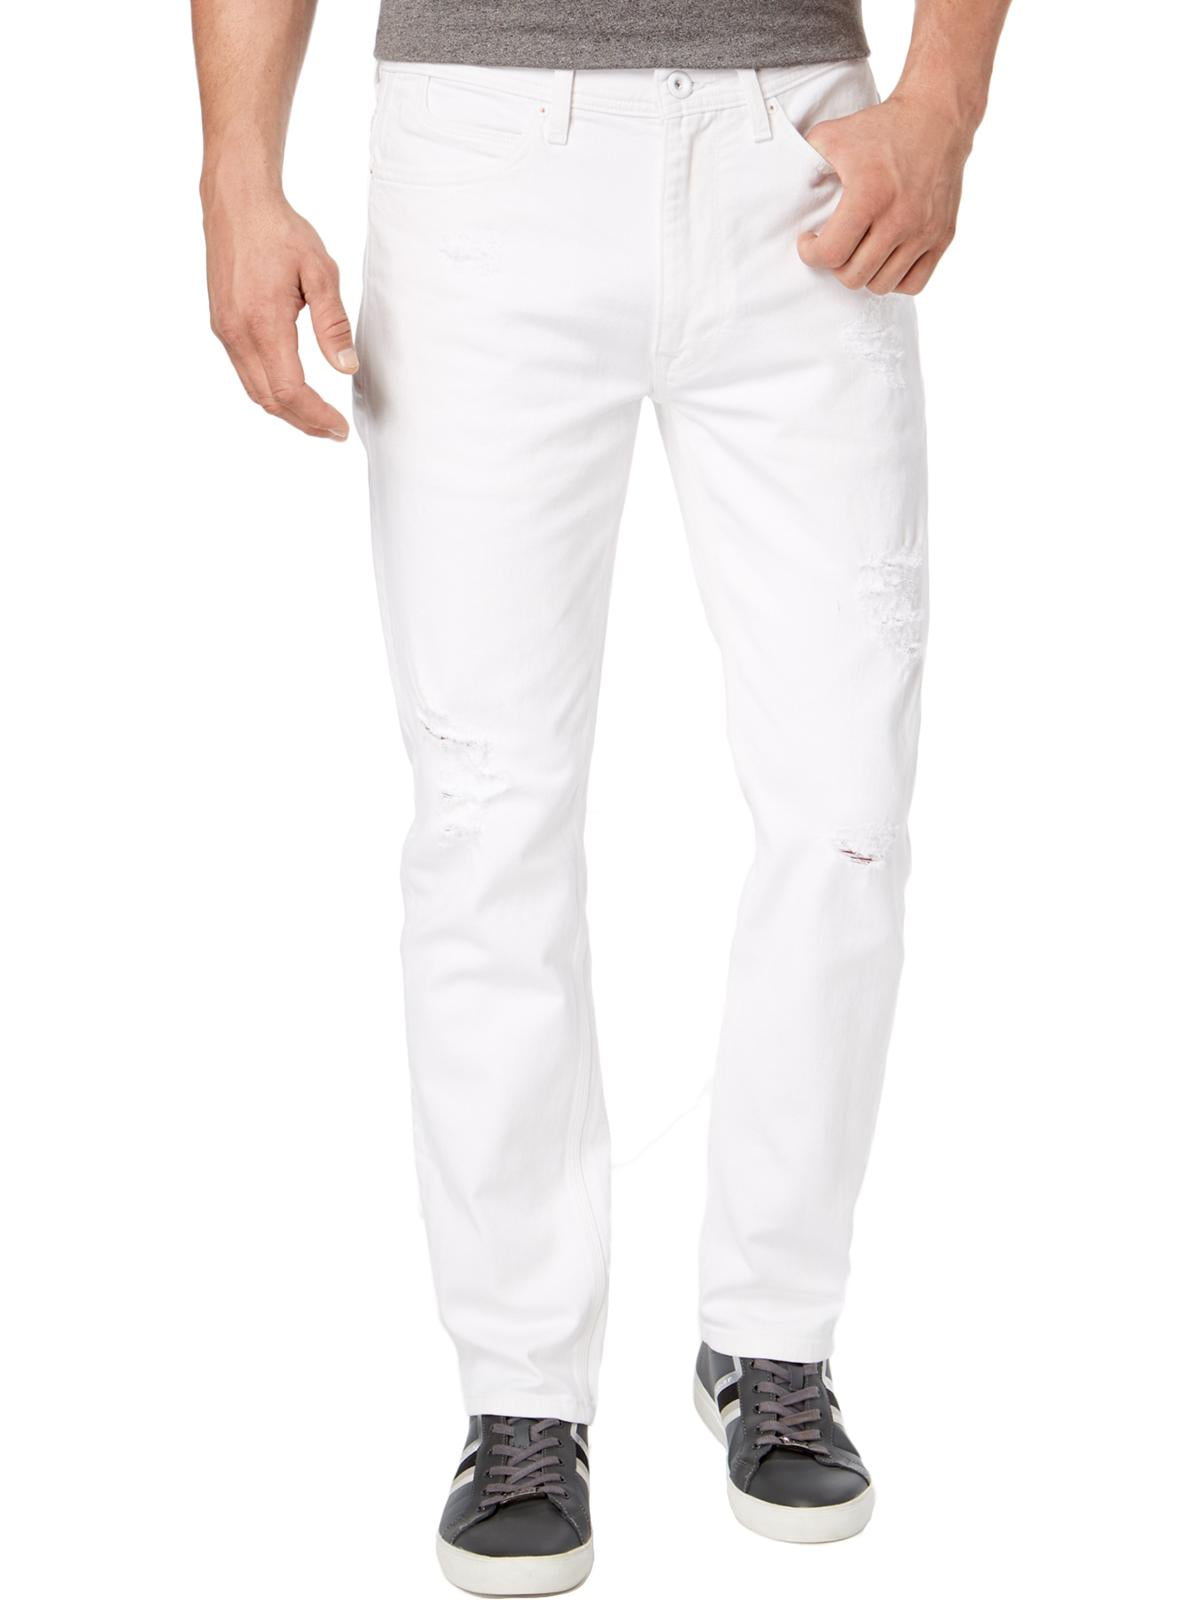 mens big and tall white jeans